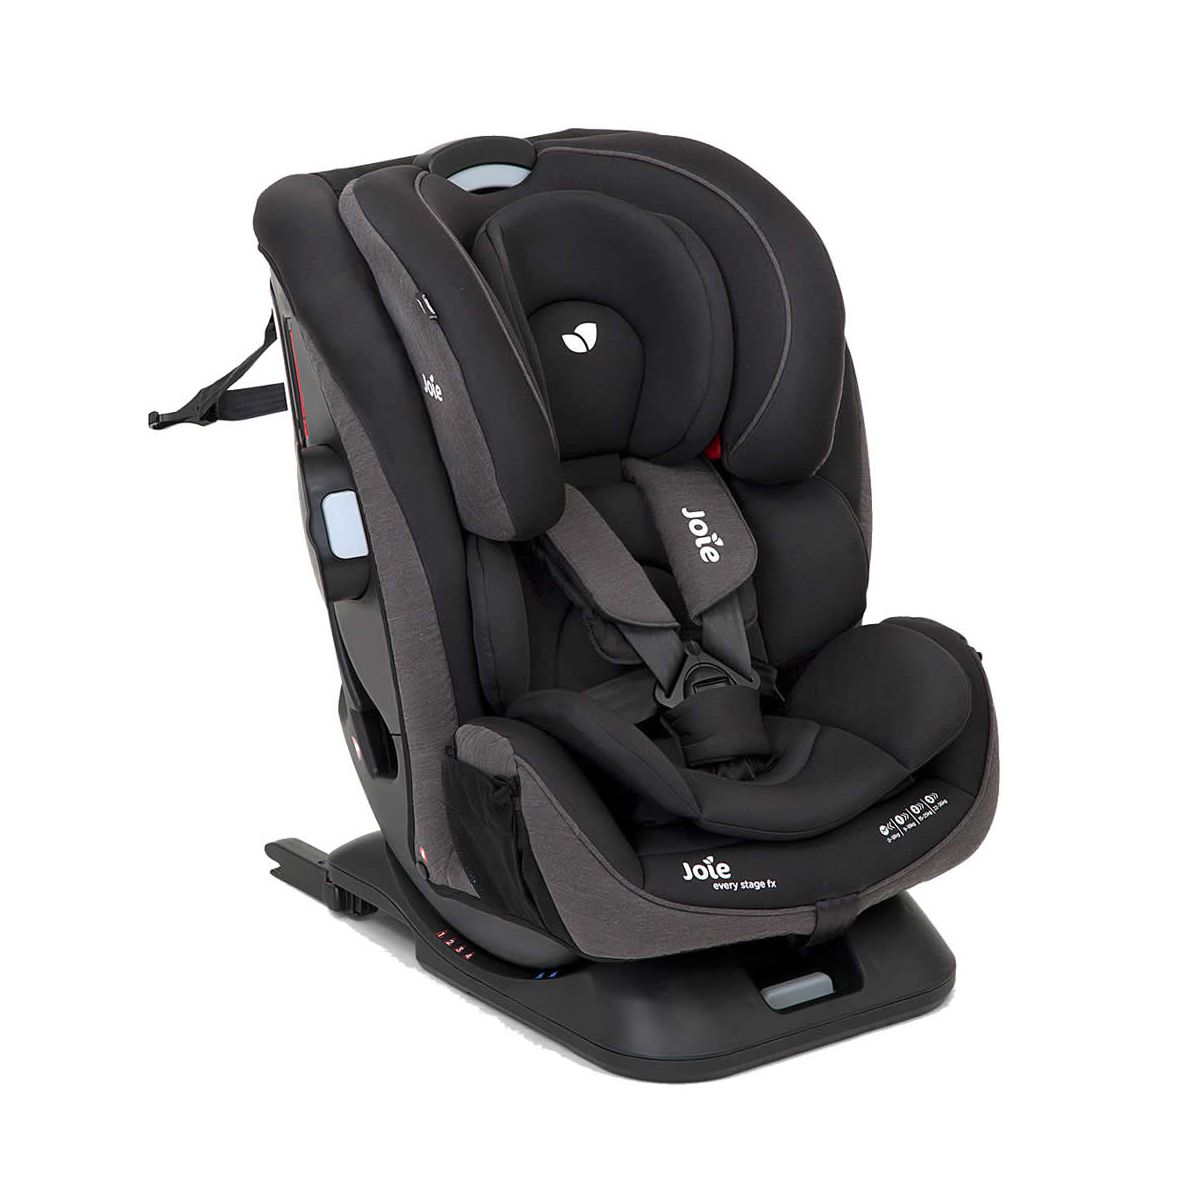 joie booster seat isofix